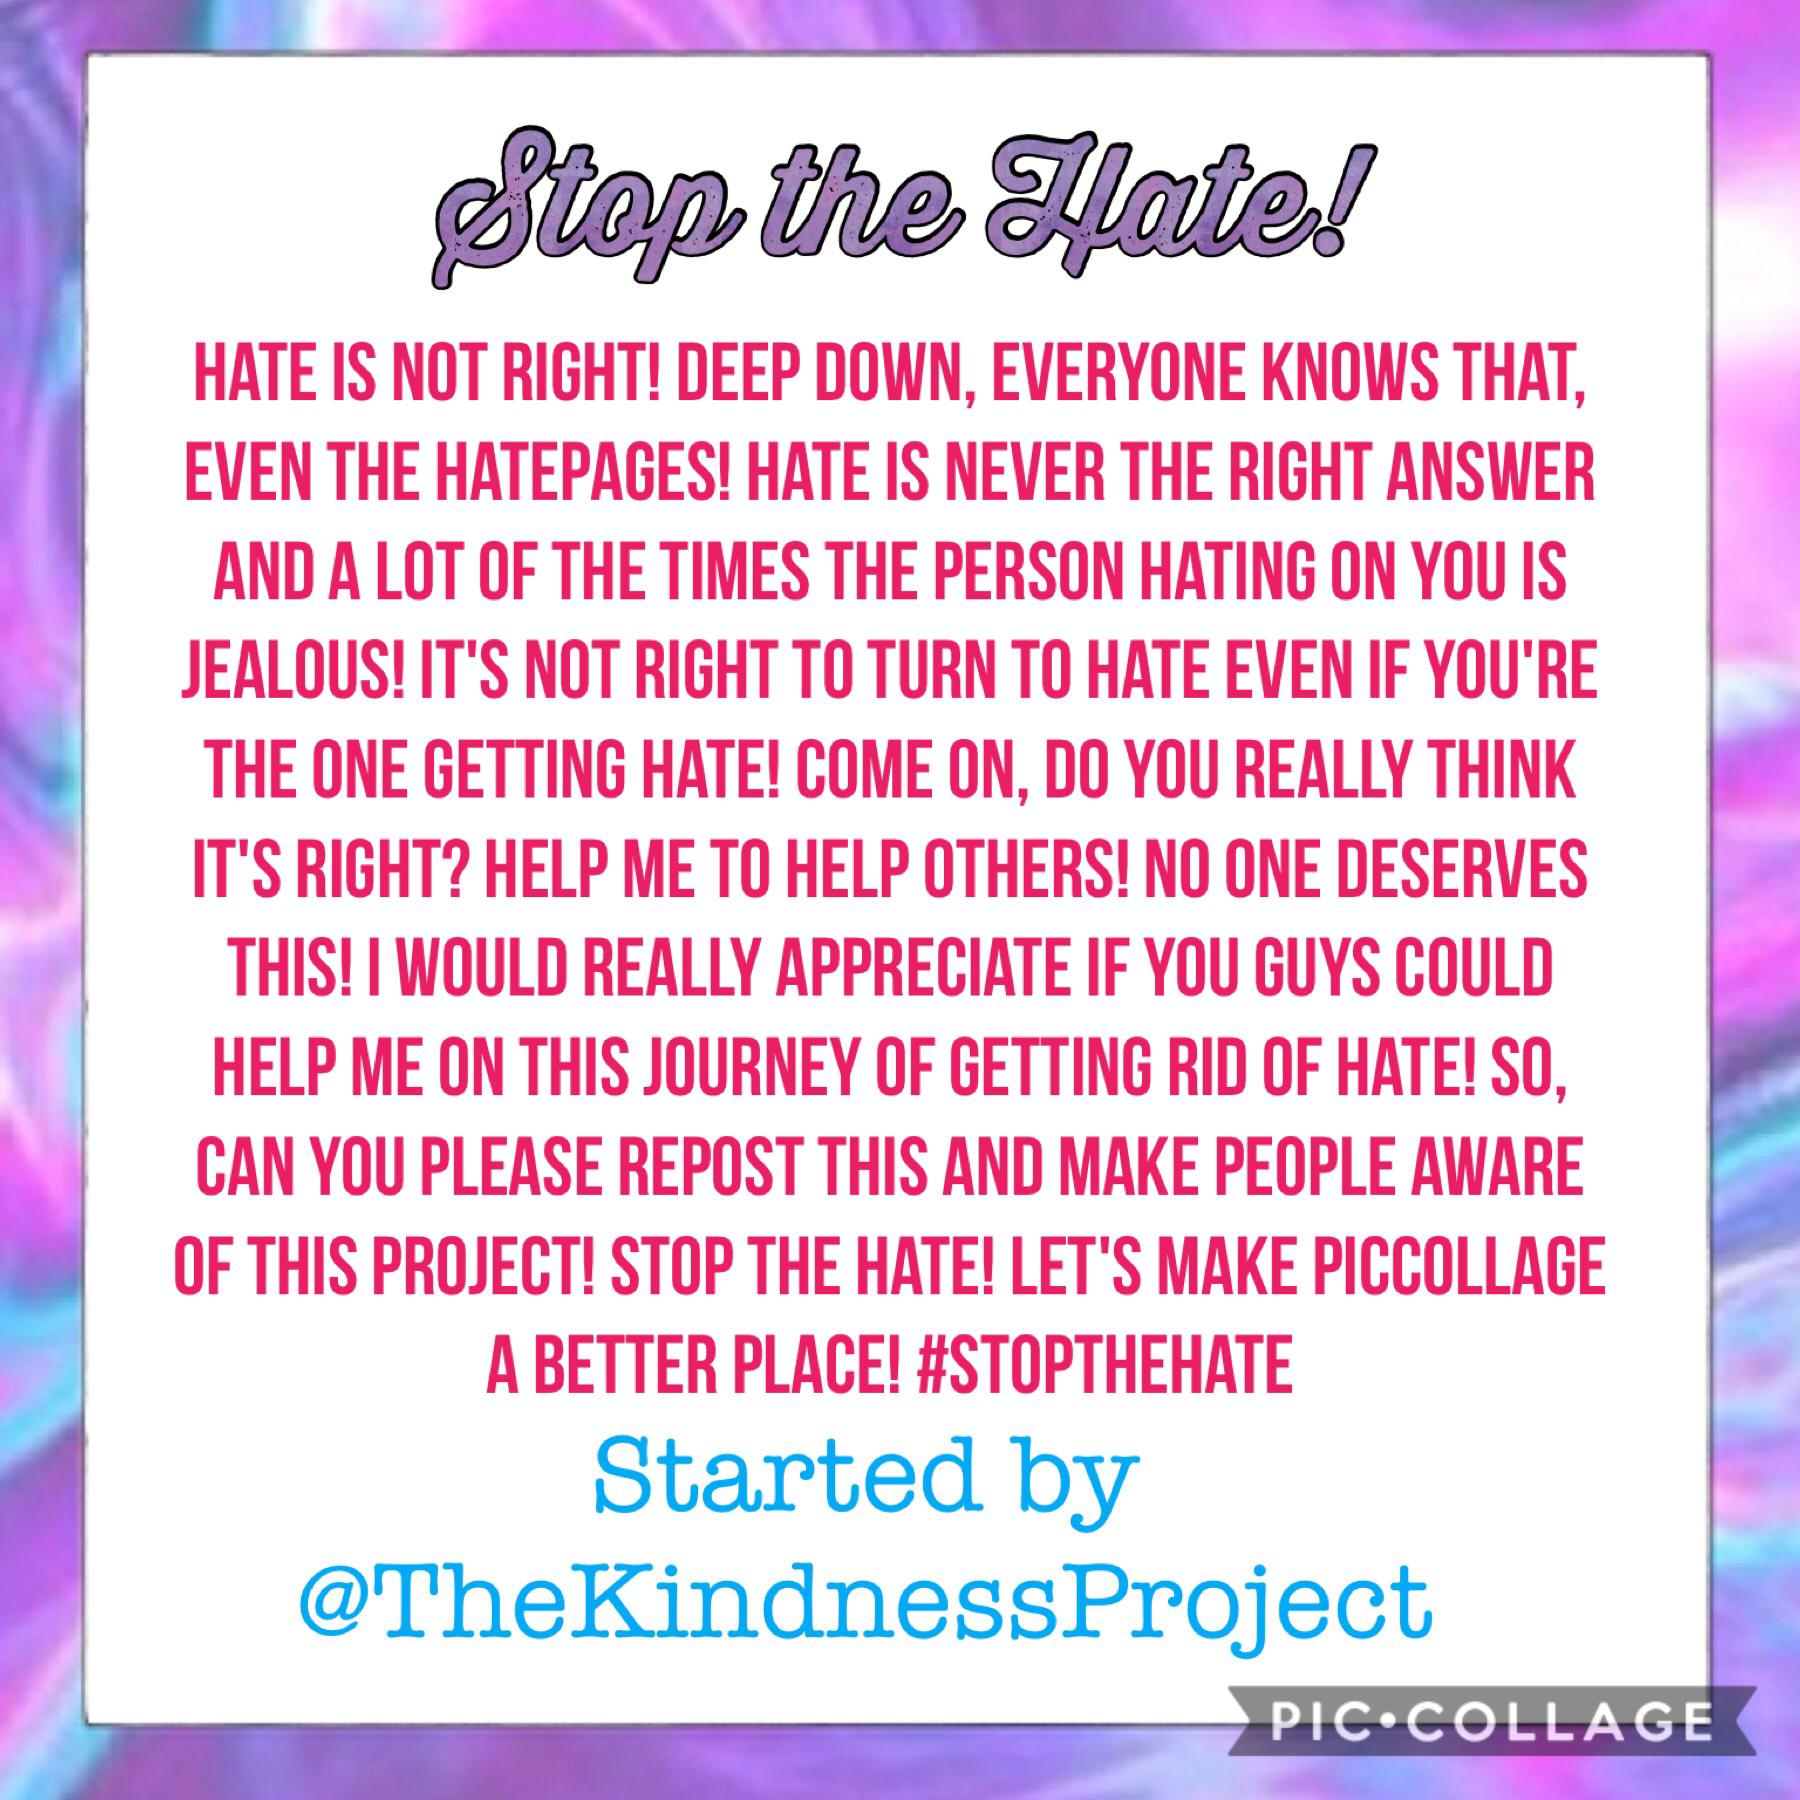 Repost this! Started by @TheKindnessProject! Stop the hate now